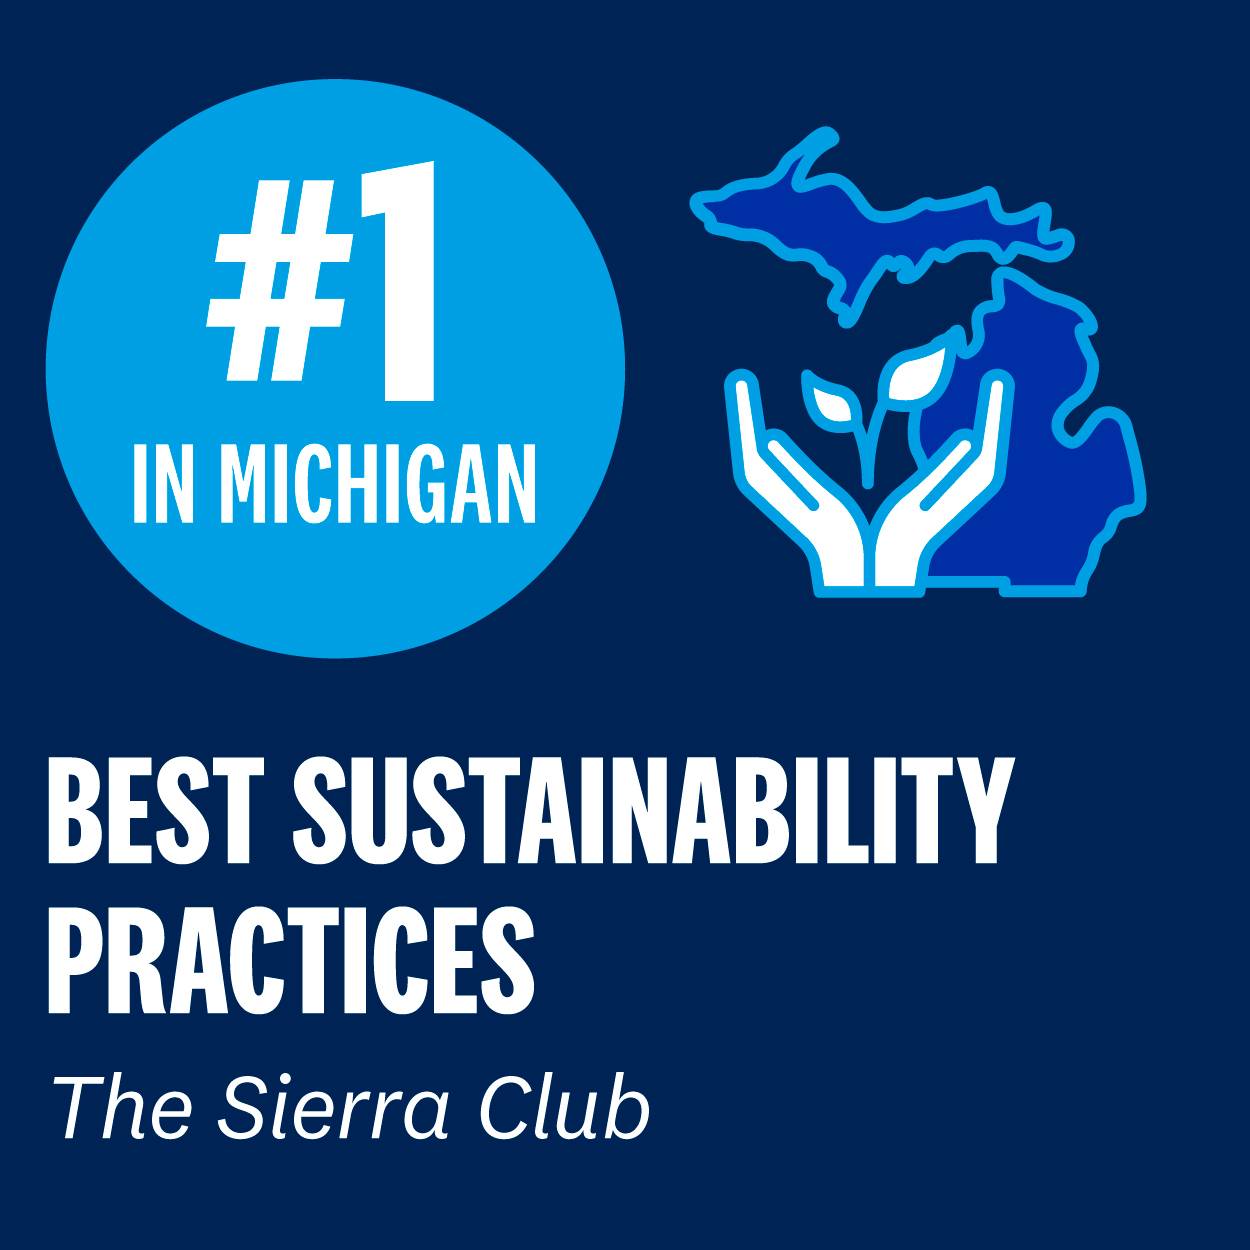 #1 in Michigan for Best Sustainability Practices from The Sierra Club